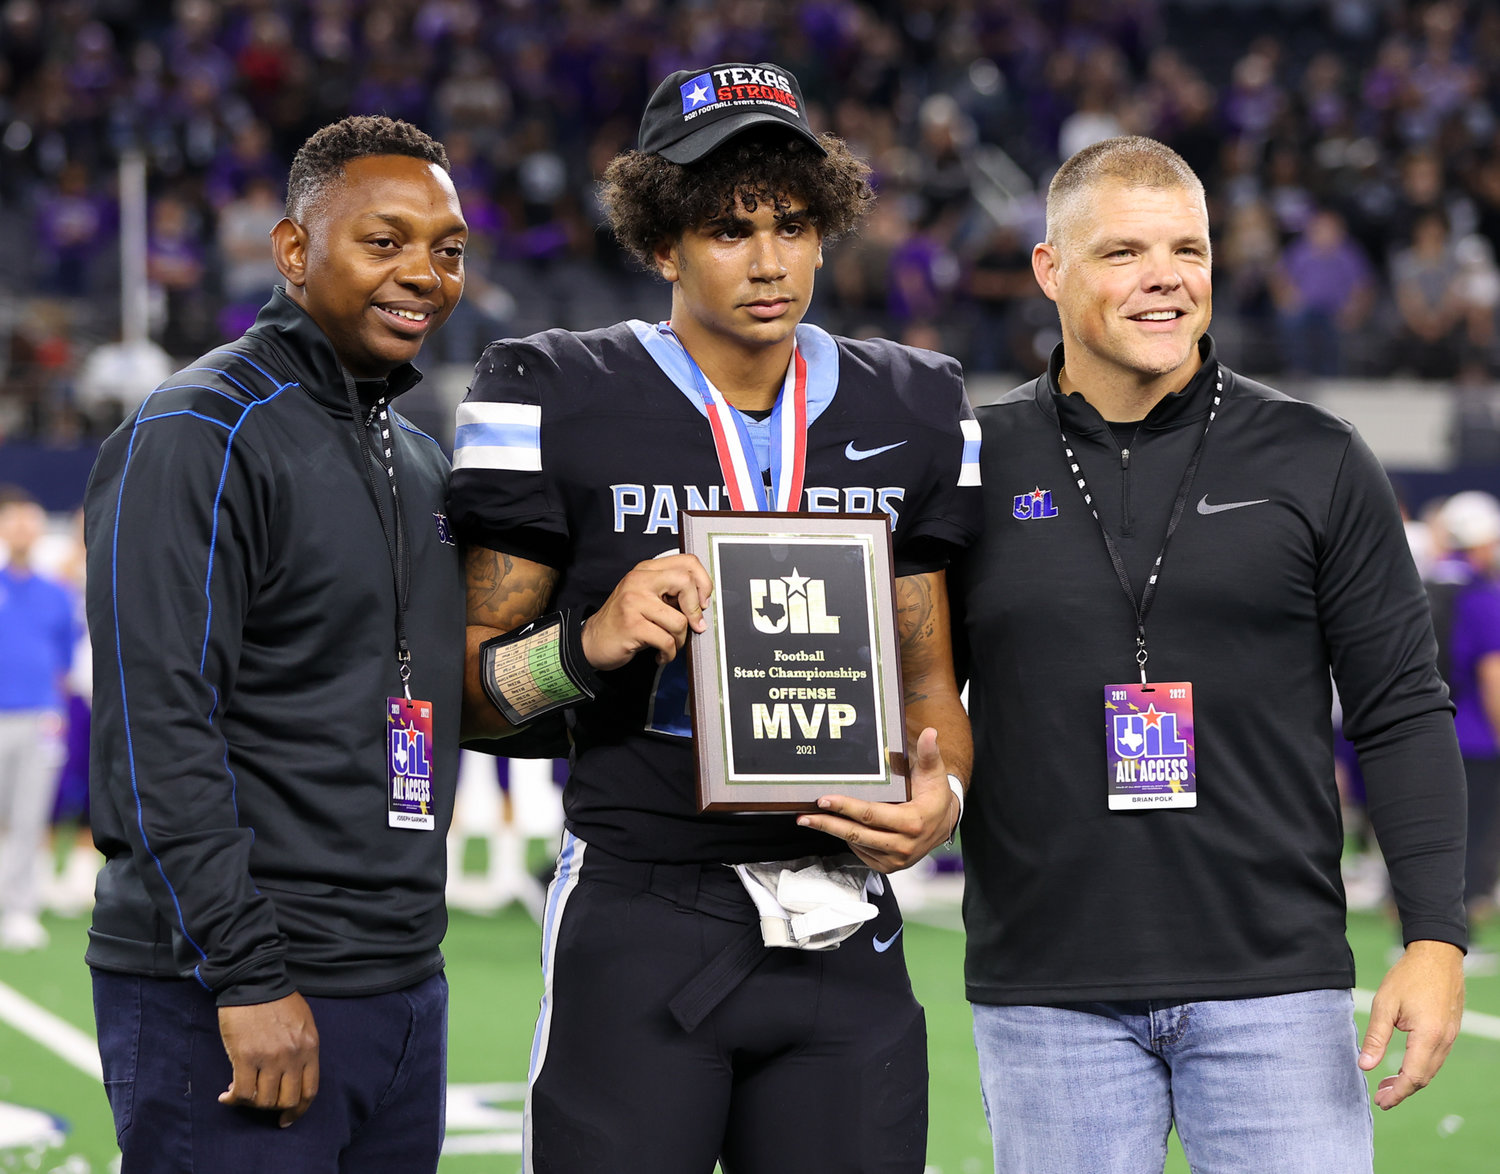 Paetow Panthers running back Jacob Brown (25) was named offensive MVP of the Class 5A Division I state football championship game on December 17, 2021 in Arlington, Texas.